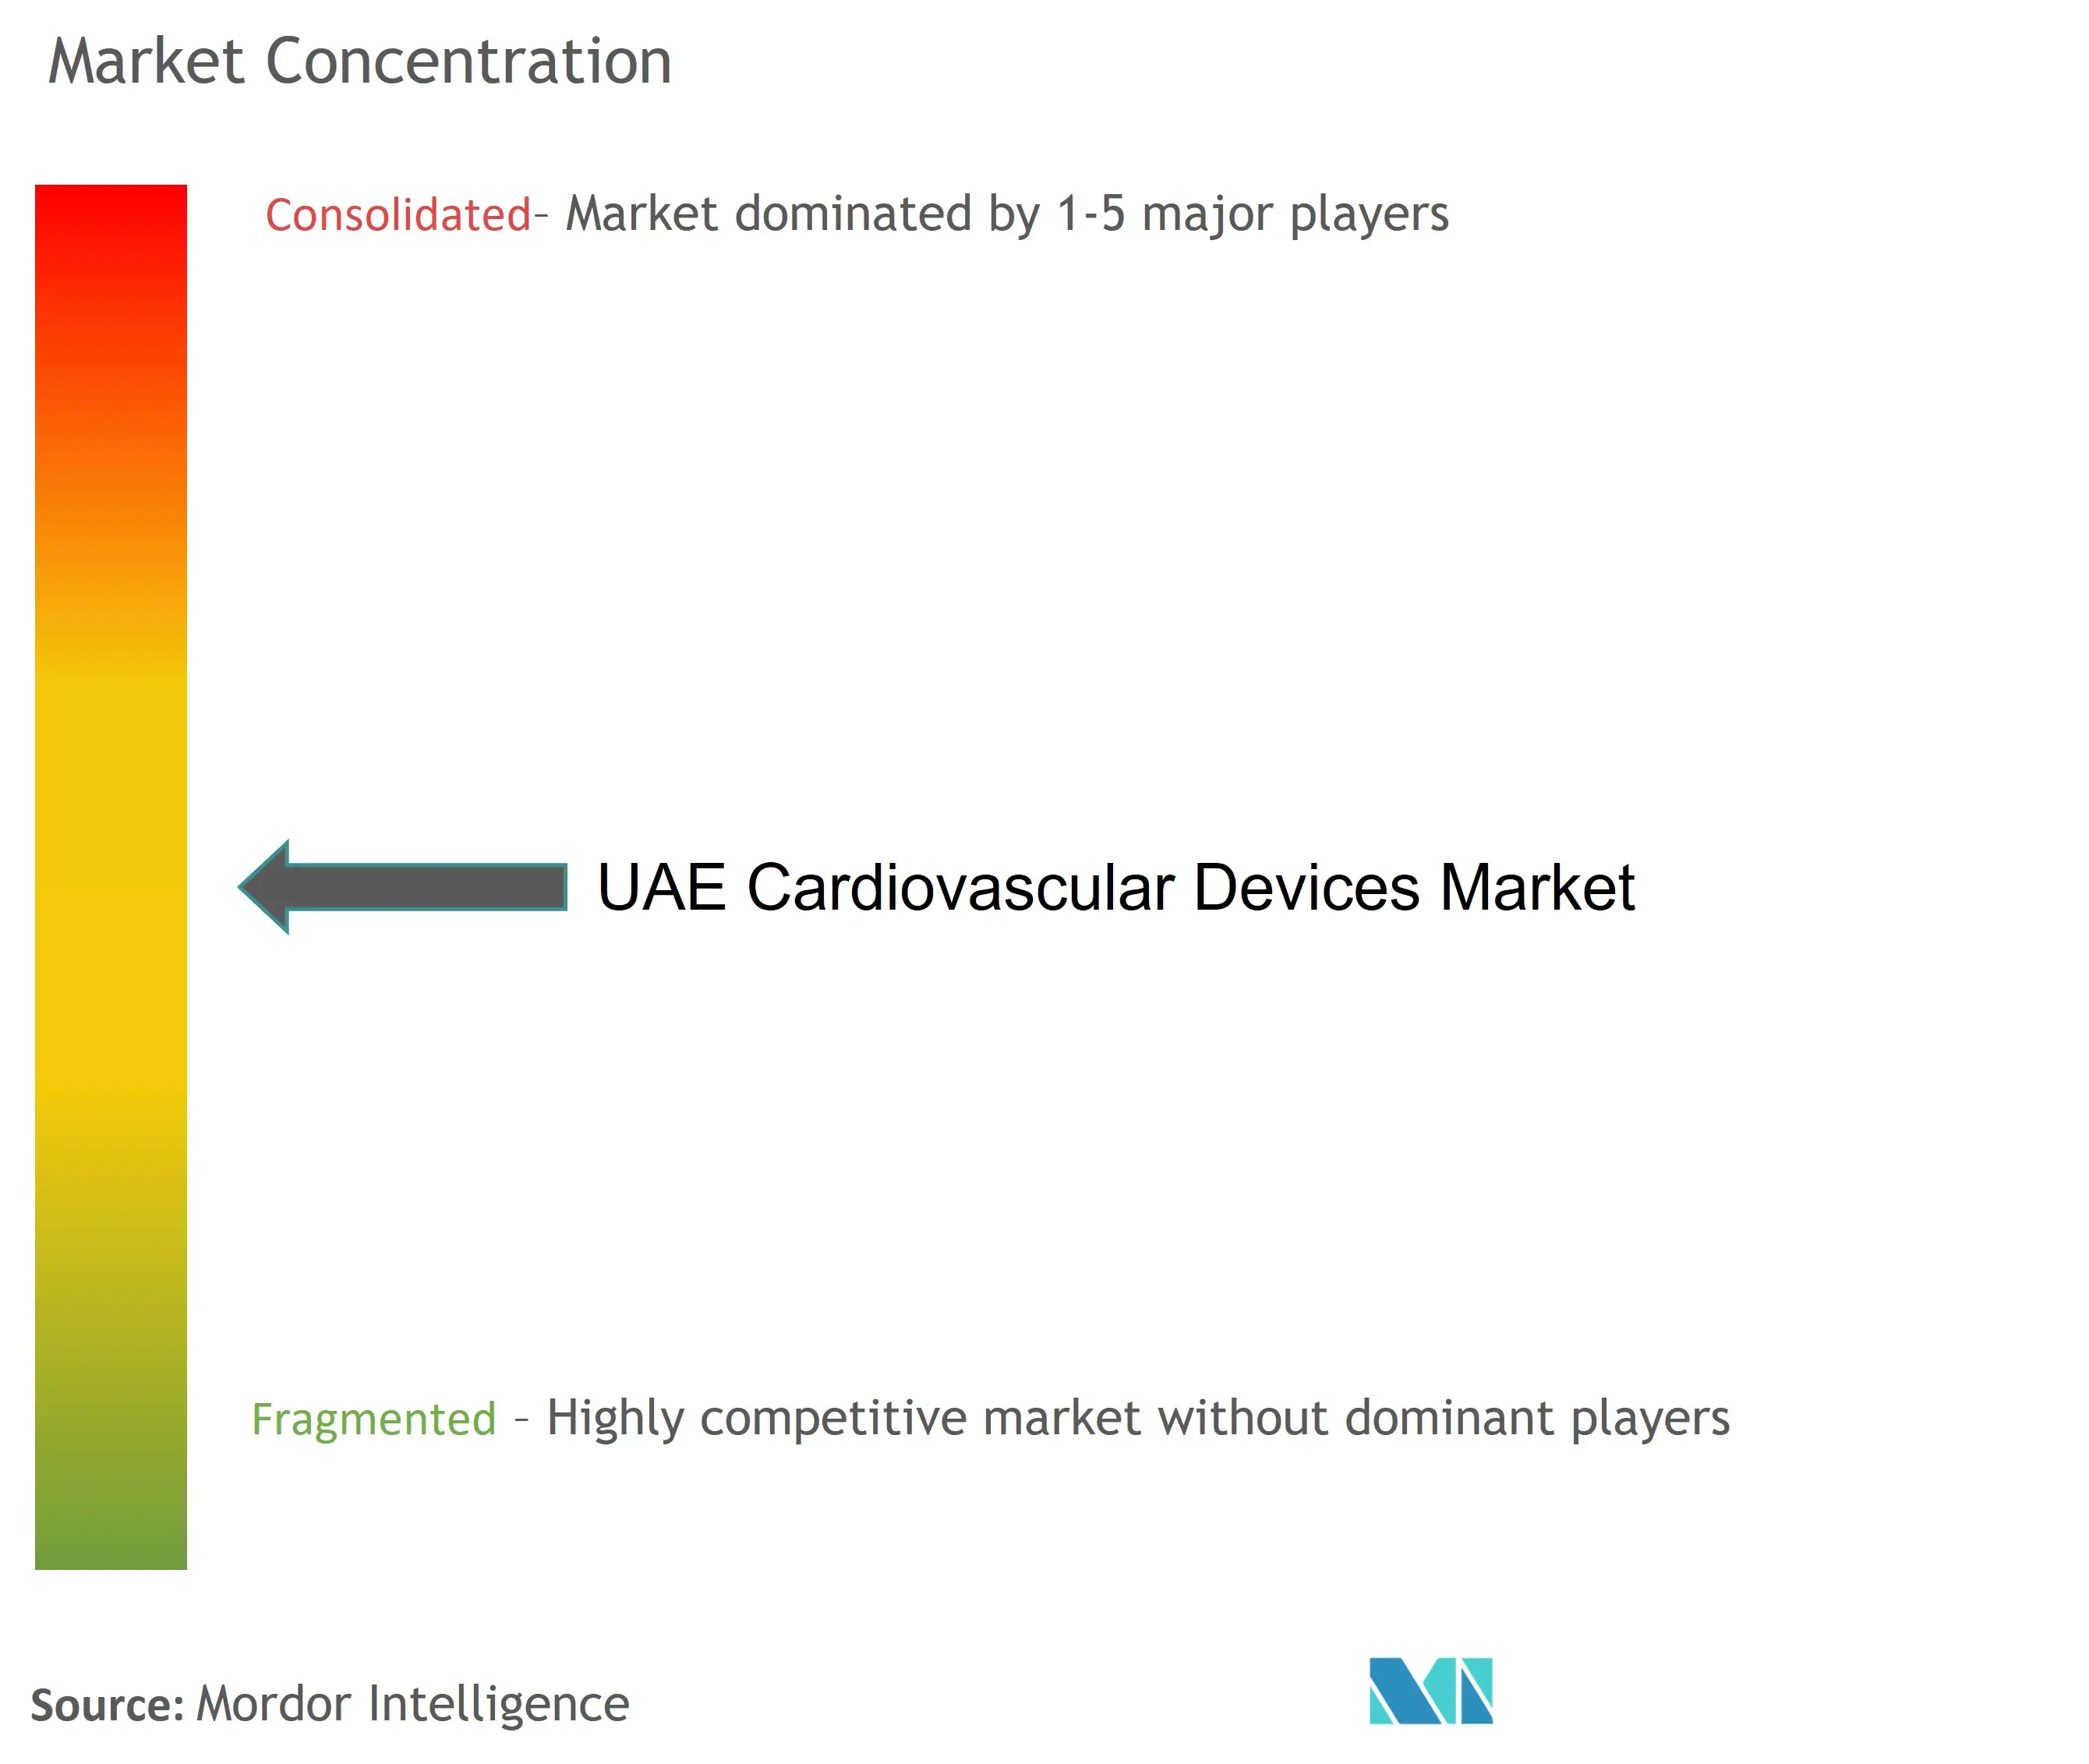 UAE Cardiovascular Devices Market Concentration